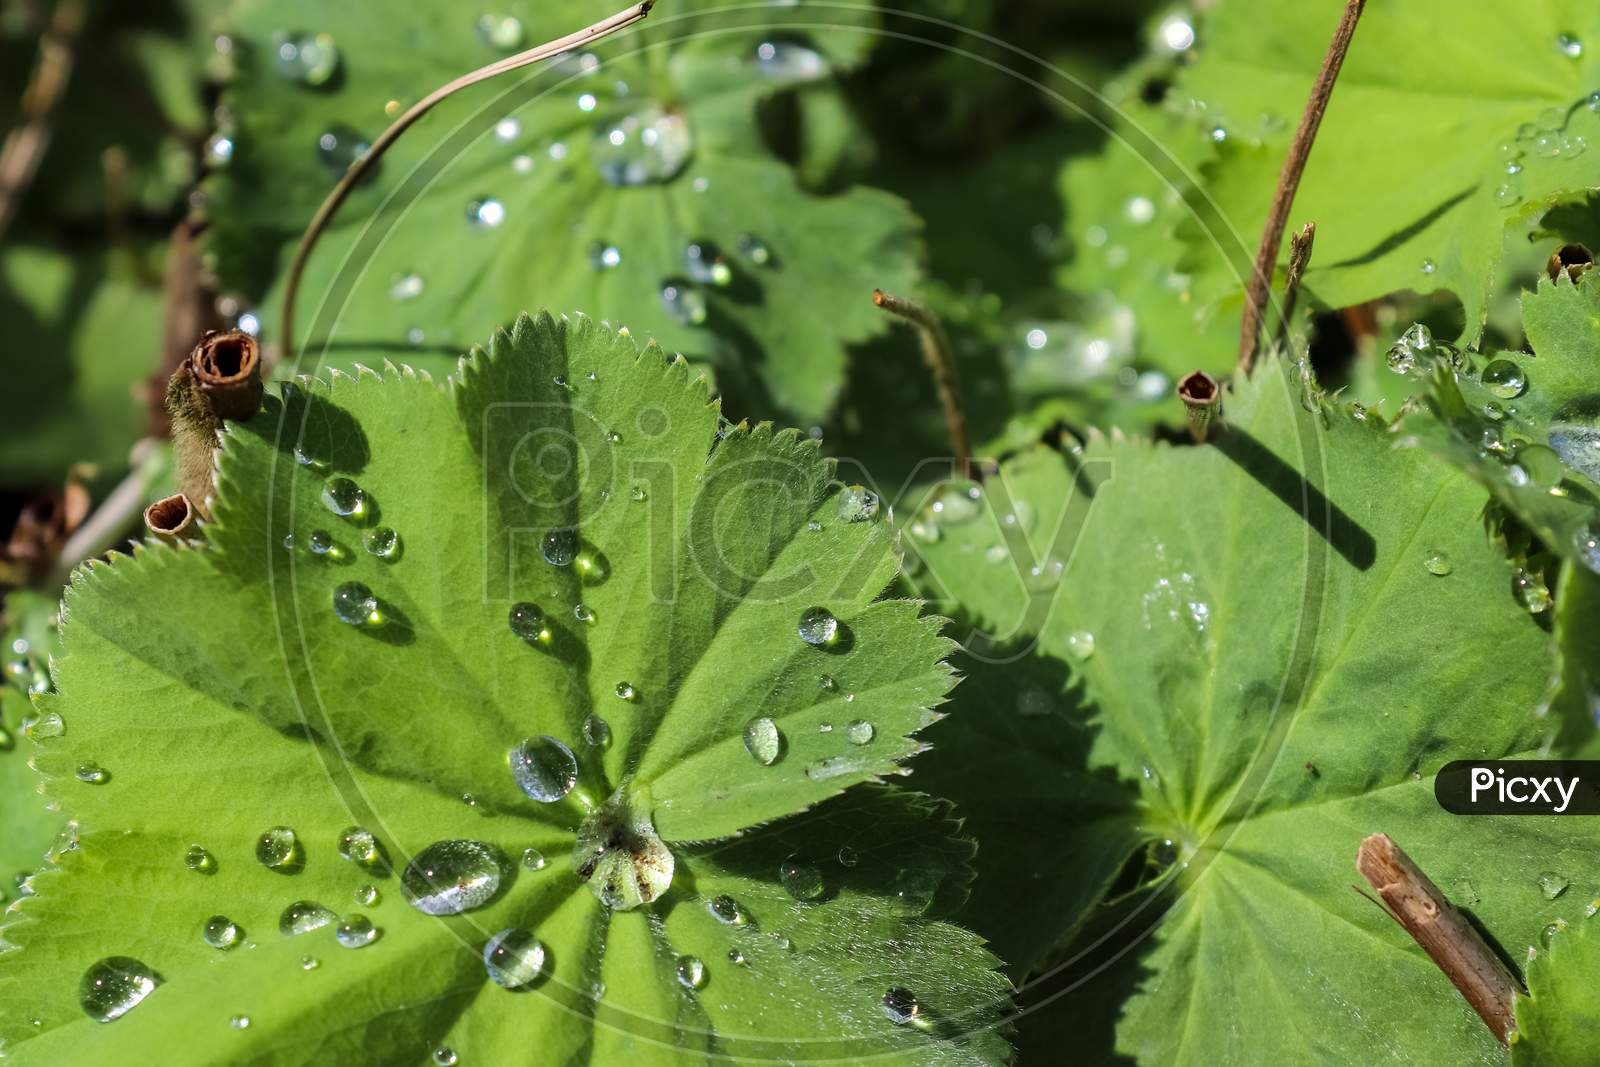 Fresh rain drops in close up view on green plants leaves and grass